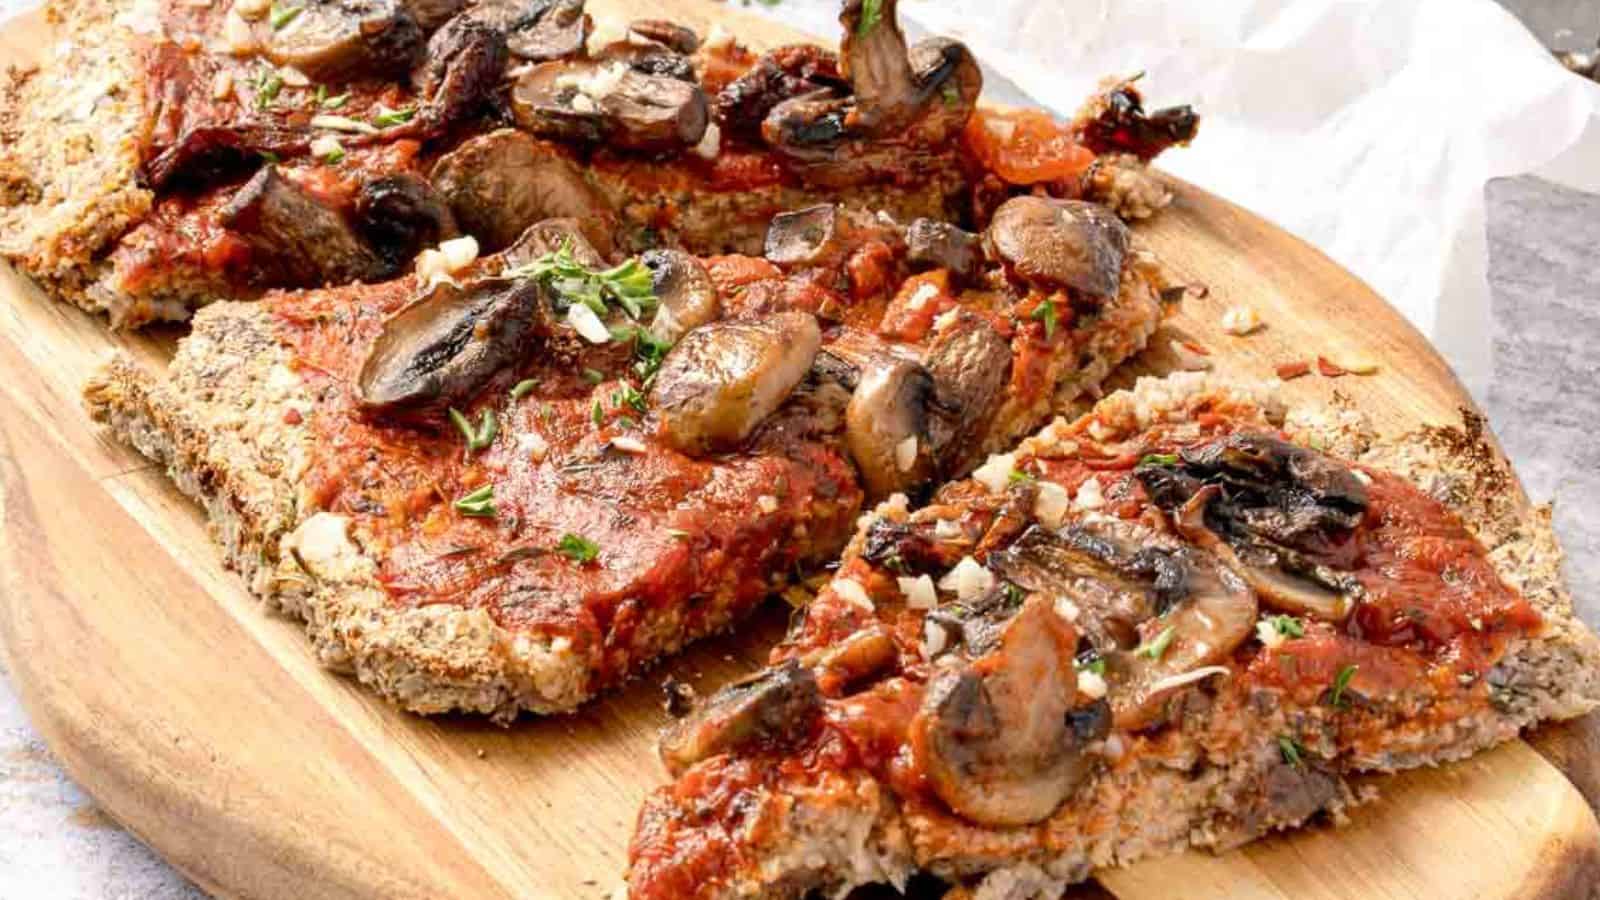 <p>Dive into our Vegan Cauliflower Pizza Crust topped with garlicky mushrooms and tomatoes for a low-carb indulgence. This pizza is not only delicious but also serves as a healthy alternative to traditional pizza crusts. It's crispy, satisfying, and packed with flavor. Making this pizza is as fun as eating it.<br><strong>Get the Recipe: </strong><a href="https://twocityvegans.com/easy-vegan-cauliflower-pizza-crust-recipe/?utm_source=msn&utm_medium=page&utm_campaign=">Vegan Cauliflower Pizza Crust with Garlicky Mushroom & Tomato Topping</a></p>